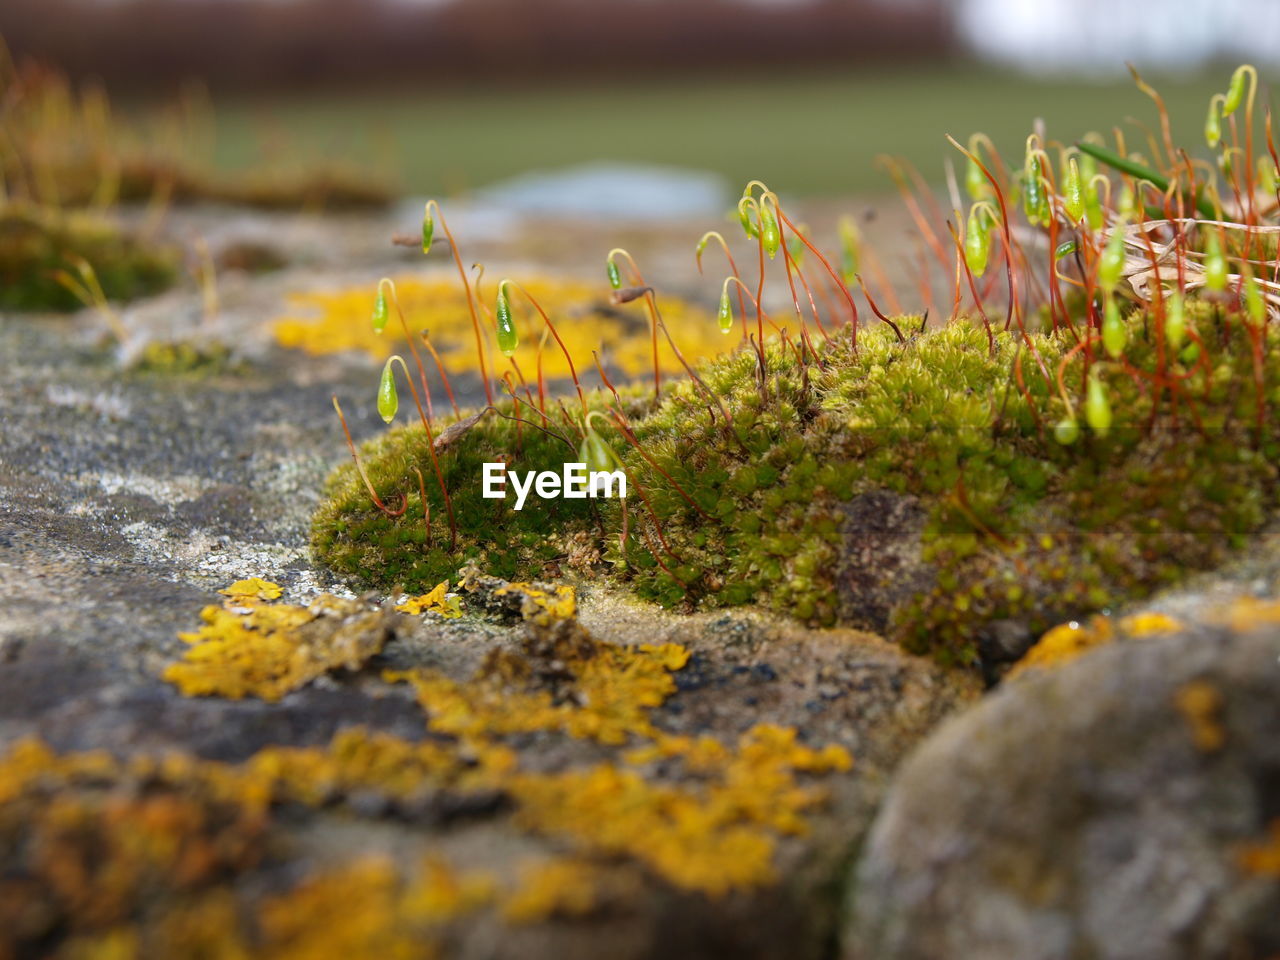 Close-up of moss and lichen growing on rock